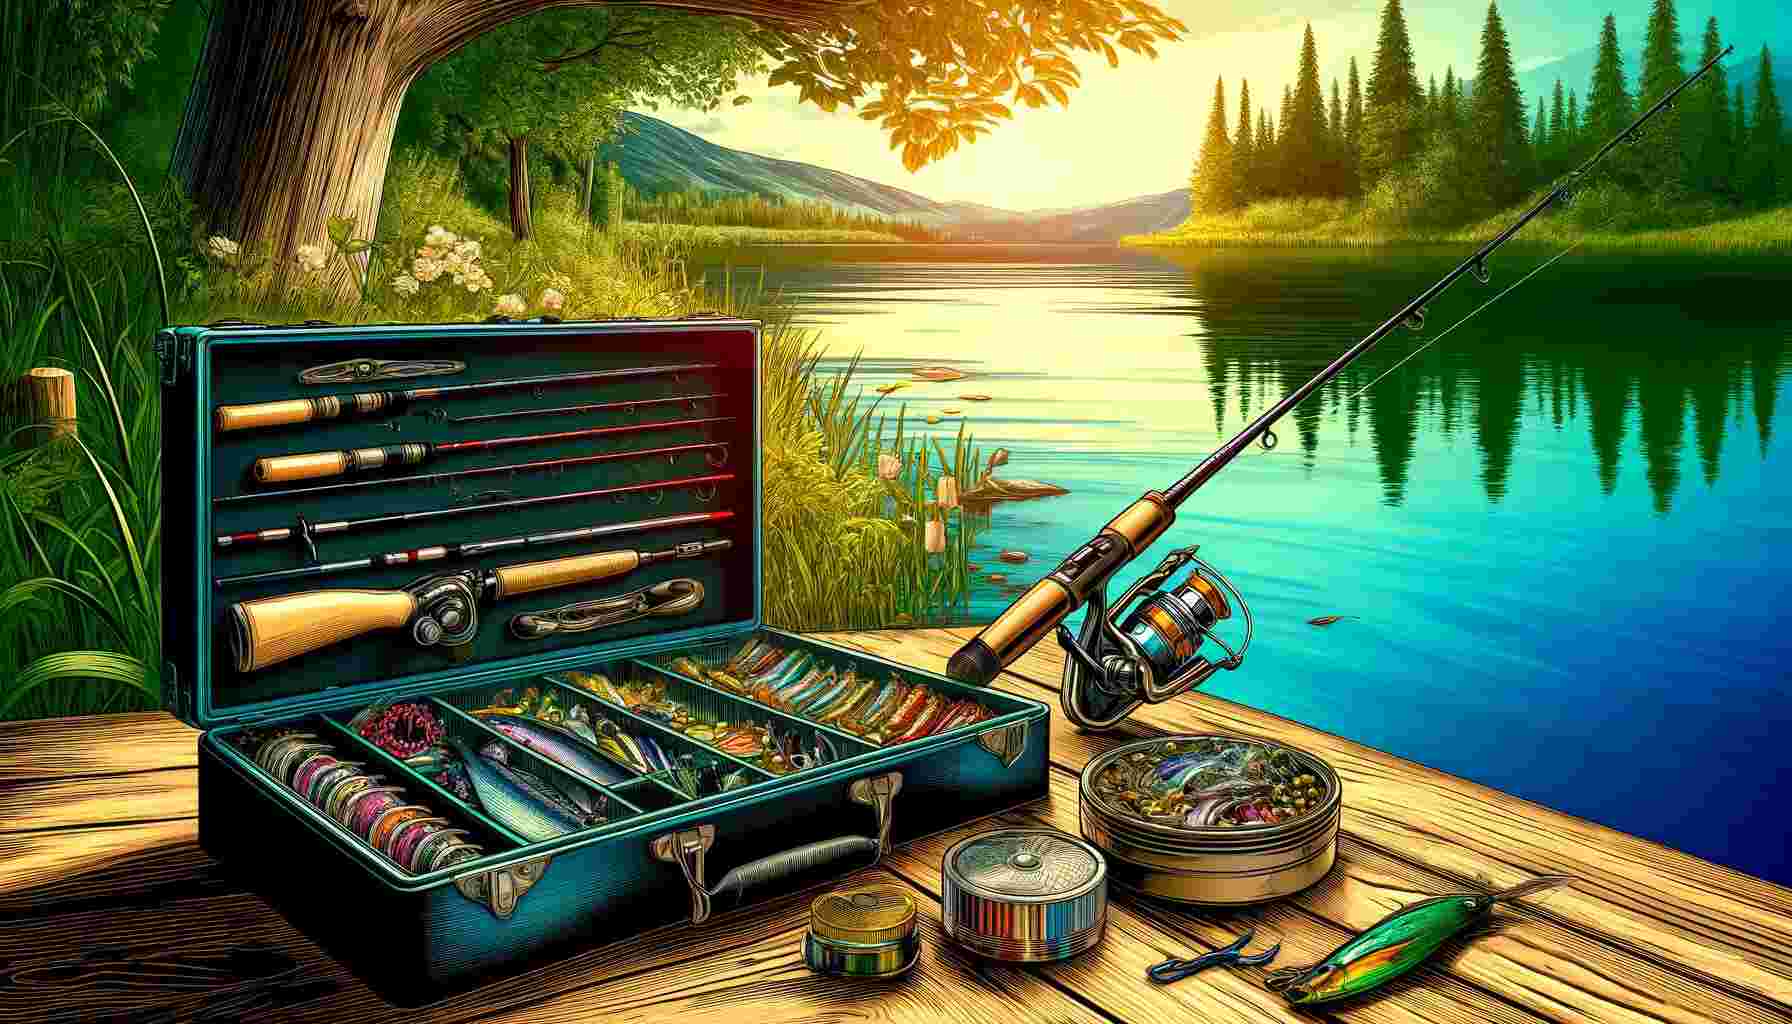 A vibrant image of a bass fishing setup on a lakeside, featuring a high-quality fishing rod and reel combo, a tackle box, and various fishing lures, with a serene lake and lush greenery in the background on a sunny day.